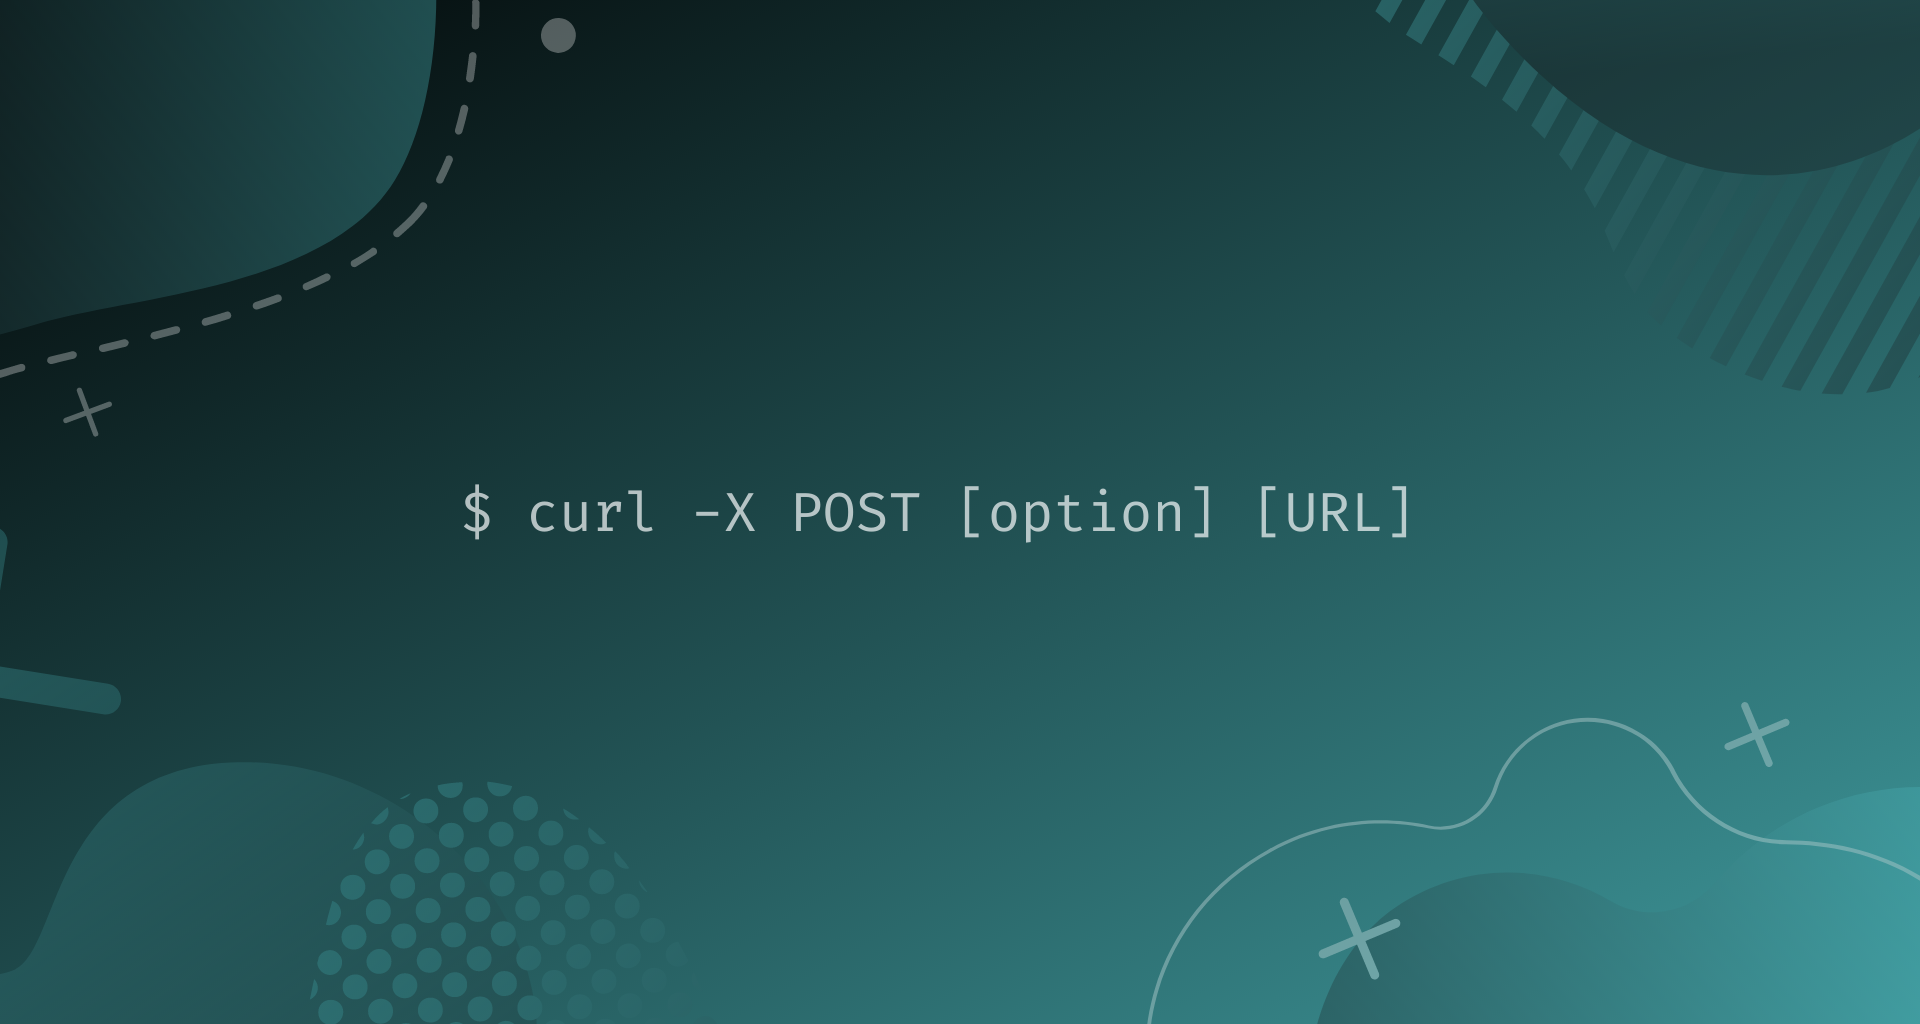 curl post request syntax on blue background